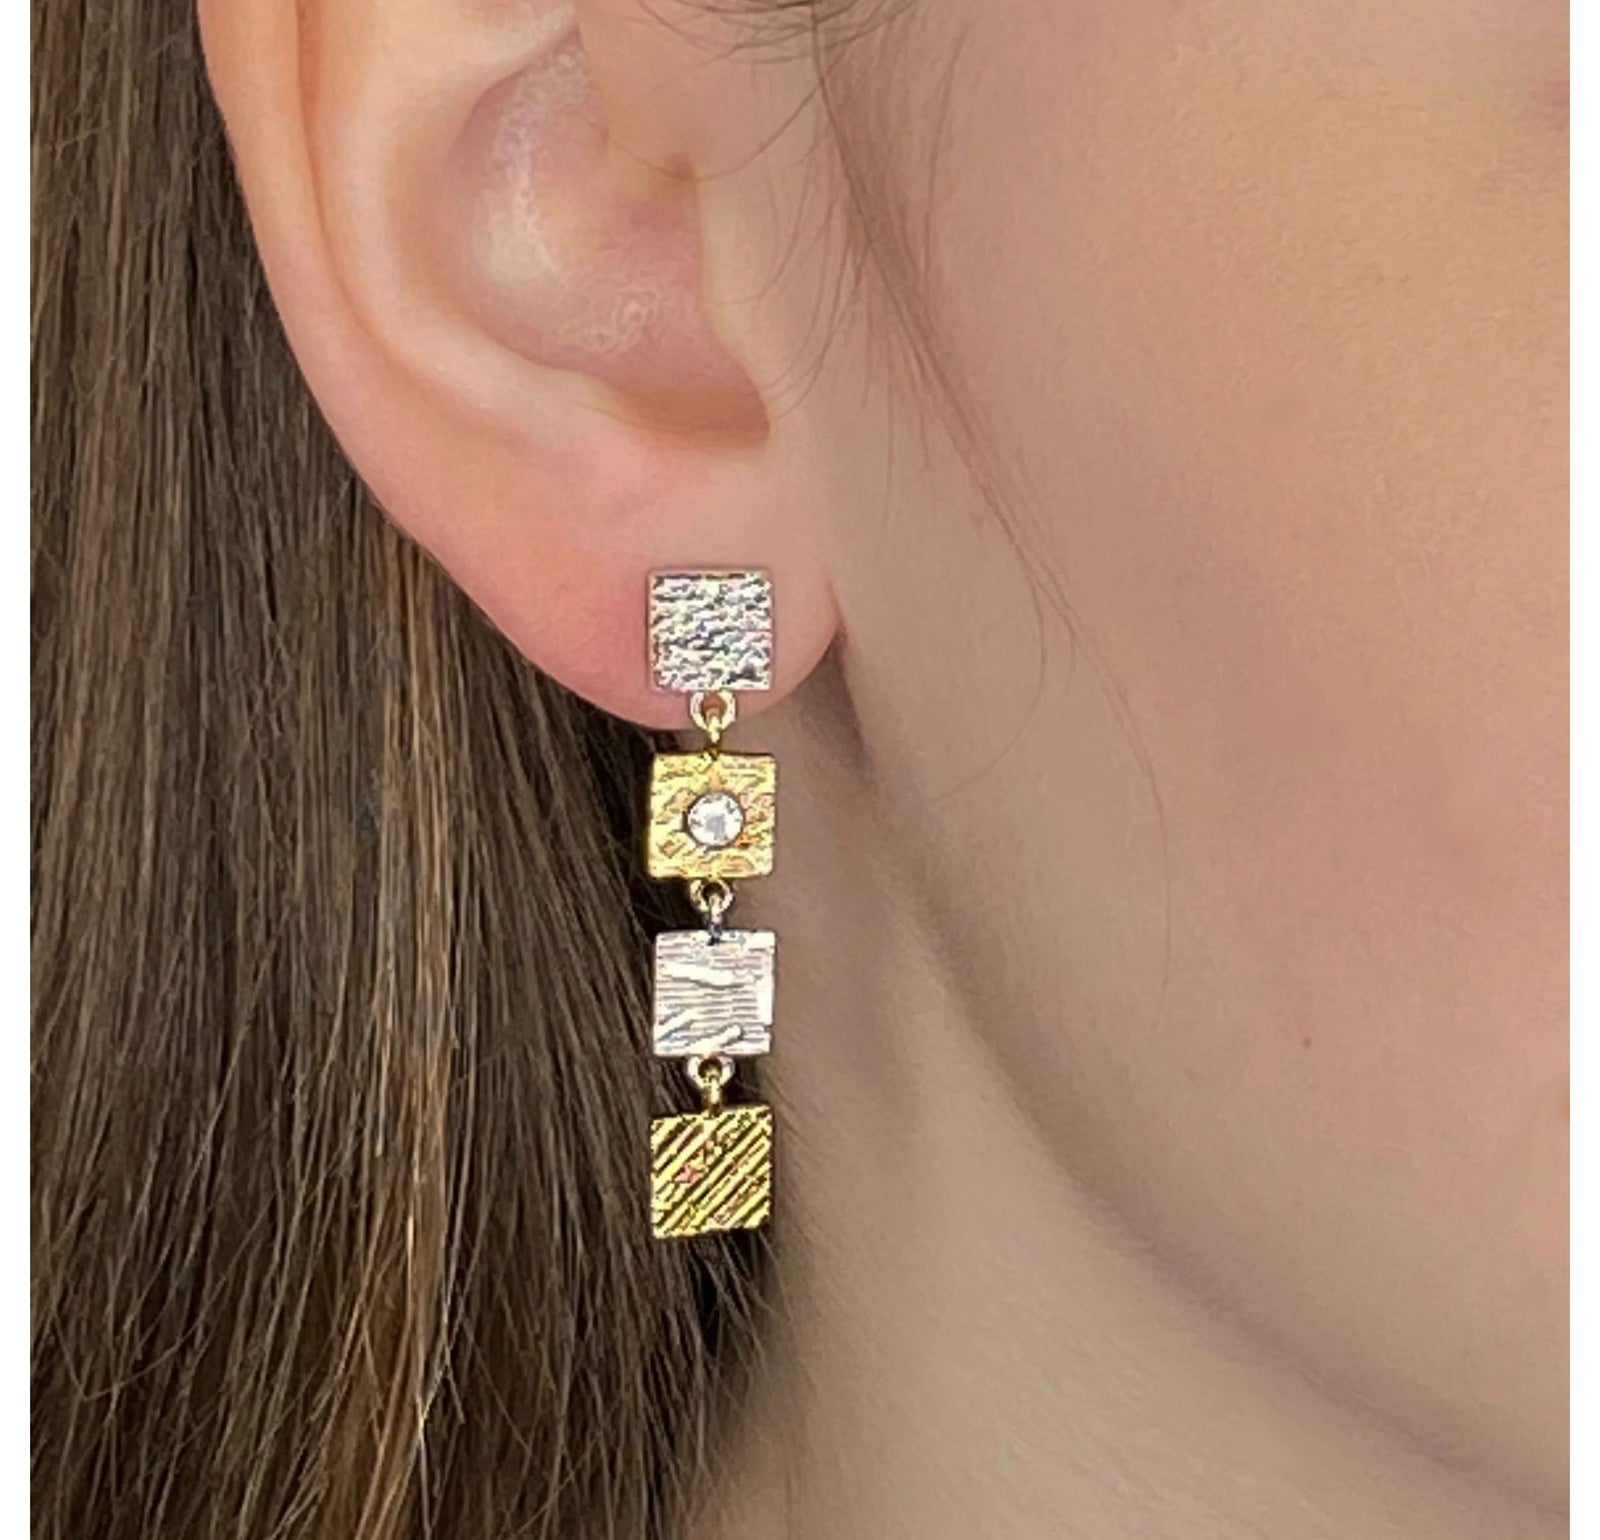 How to Buy and Wear Mismatched Earrings - Q Evon